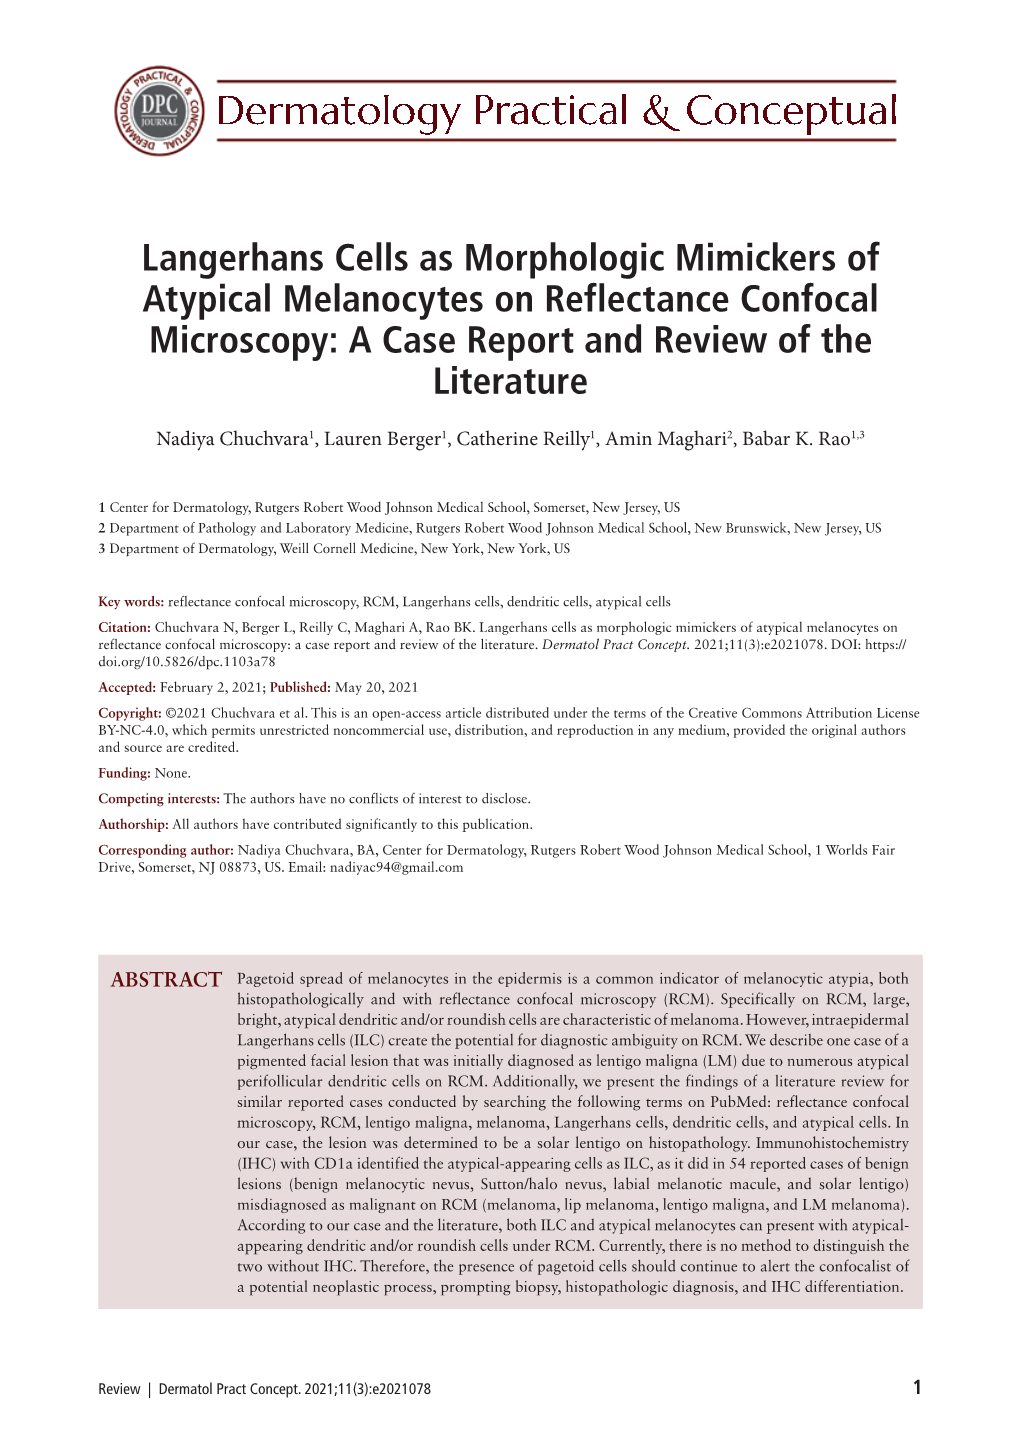 Langerhans Cells As Morphologic Mimickers of Atypical Melanocytes on Reflectance Confocal Microscopy: a Case Report and Review of the Literature